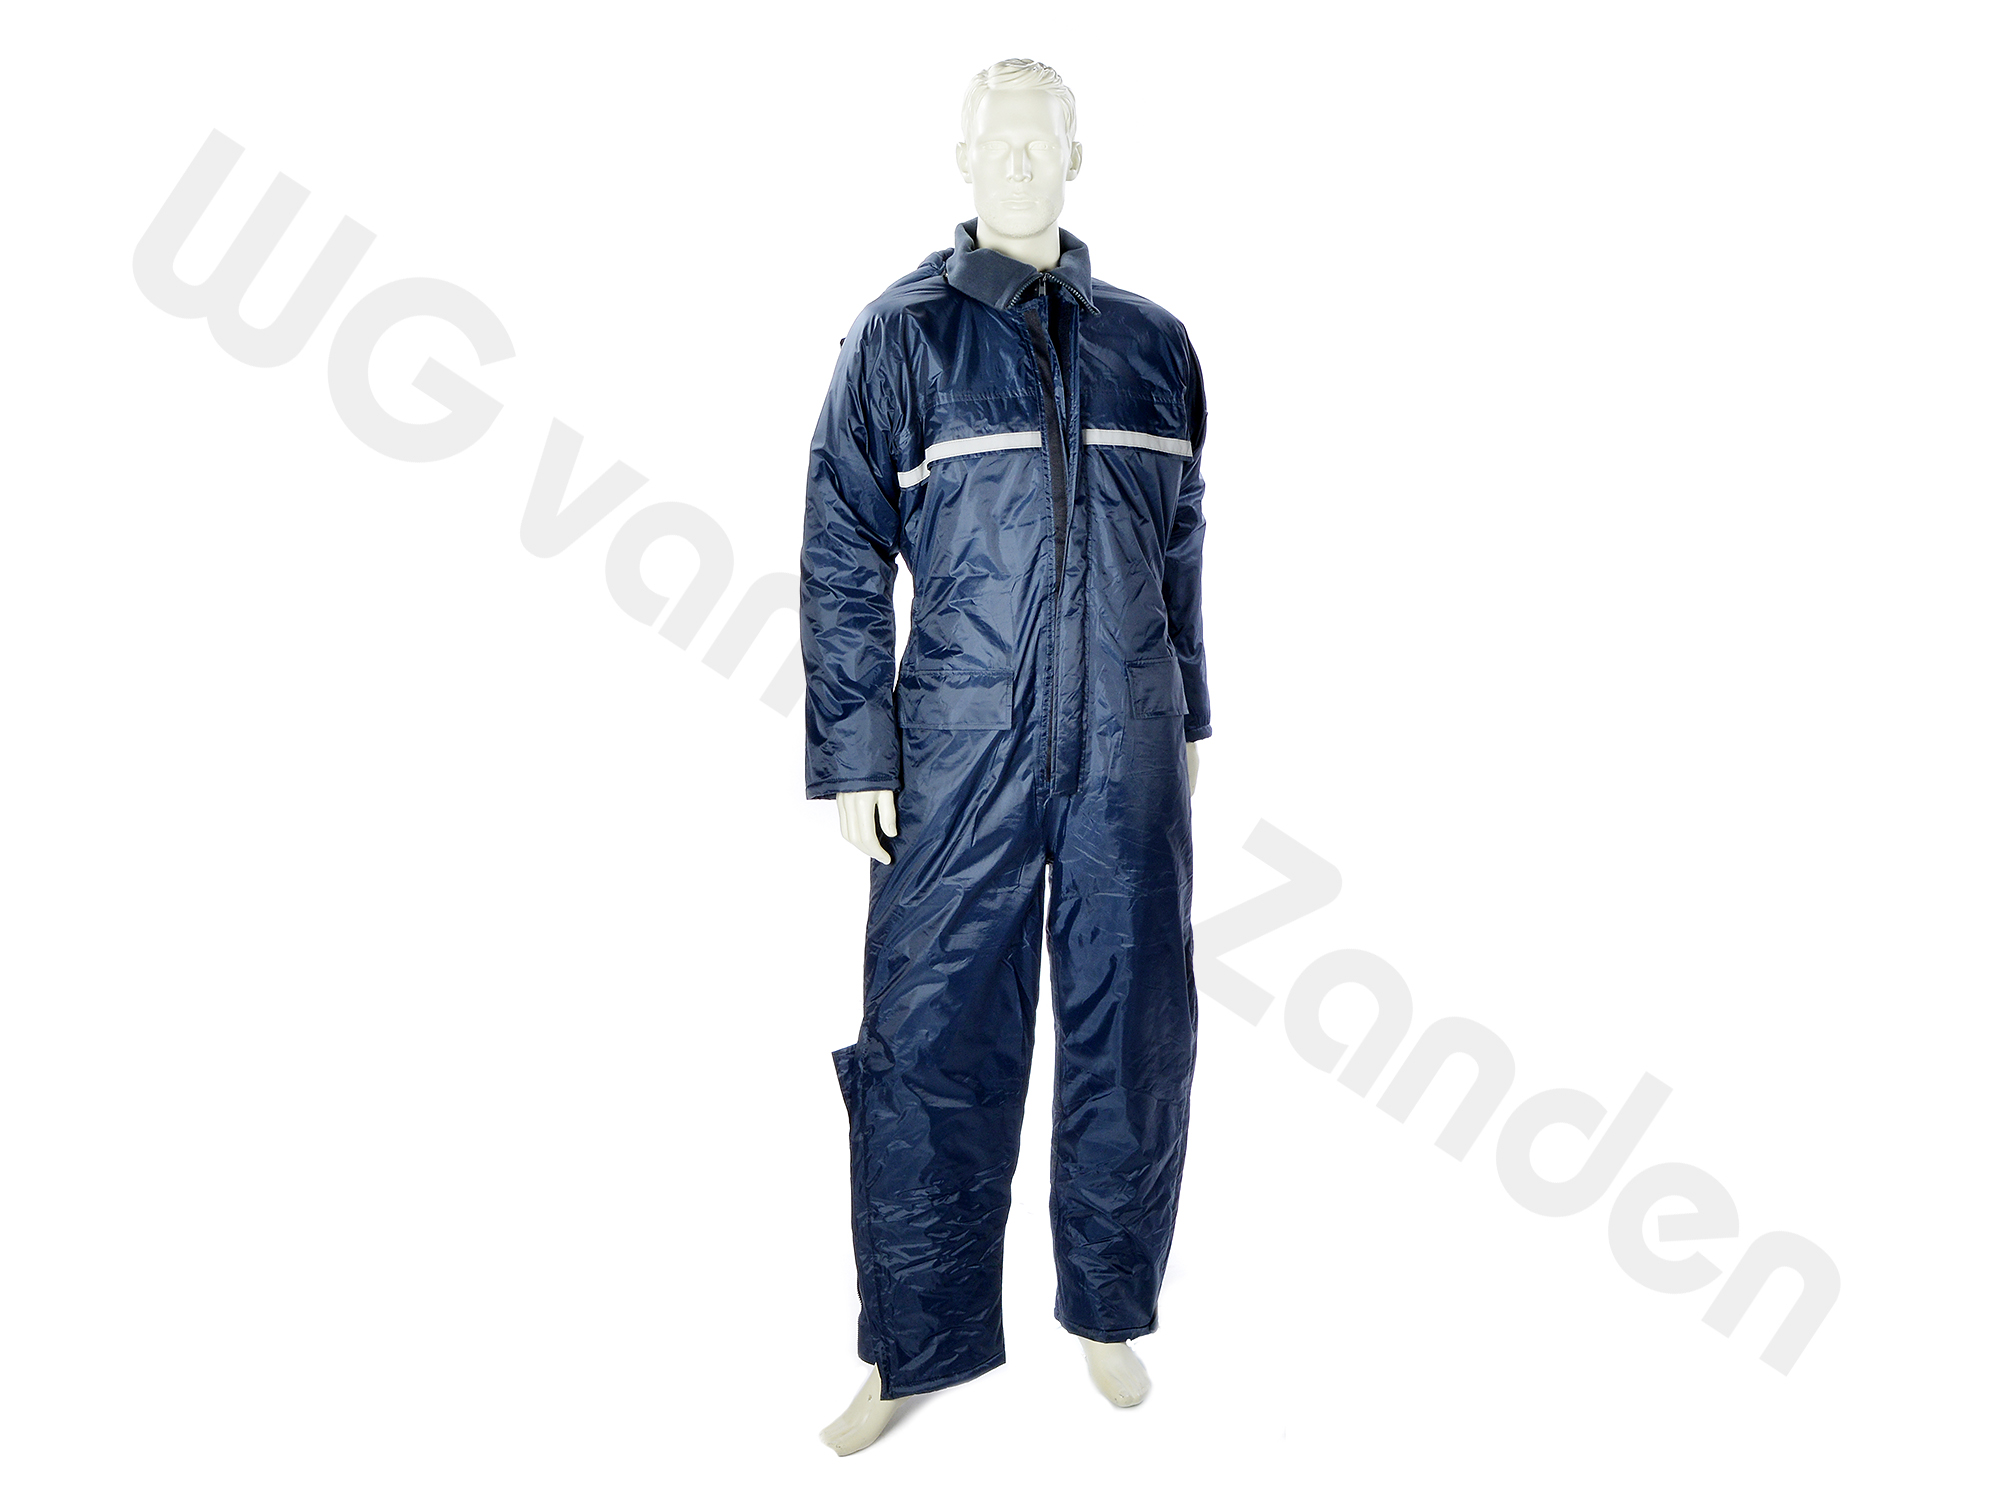 887002 WINTER BOILER SUIT WITH REFLECTIVE TAPE POLYESTER 54/56 L